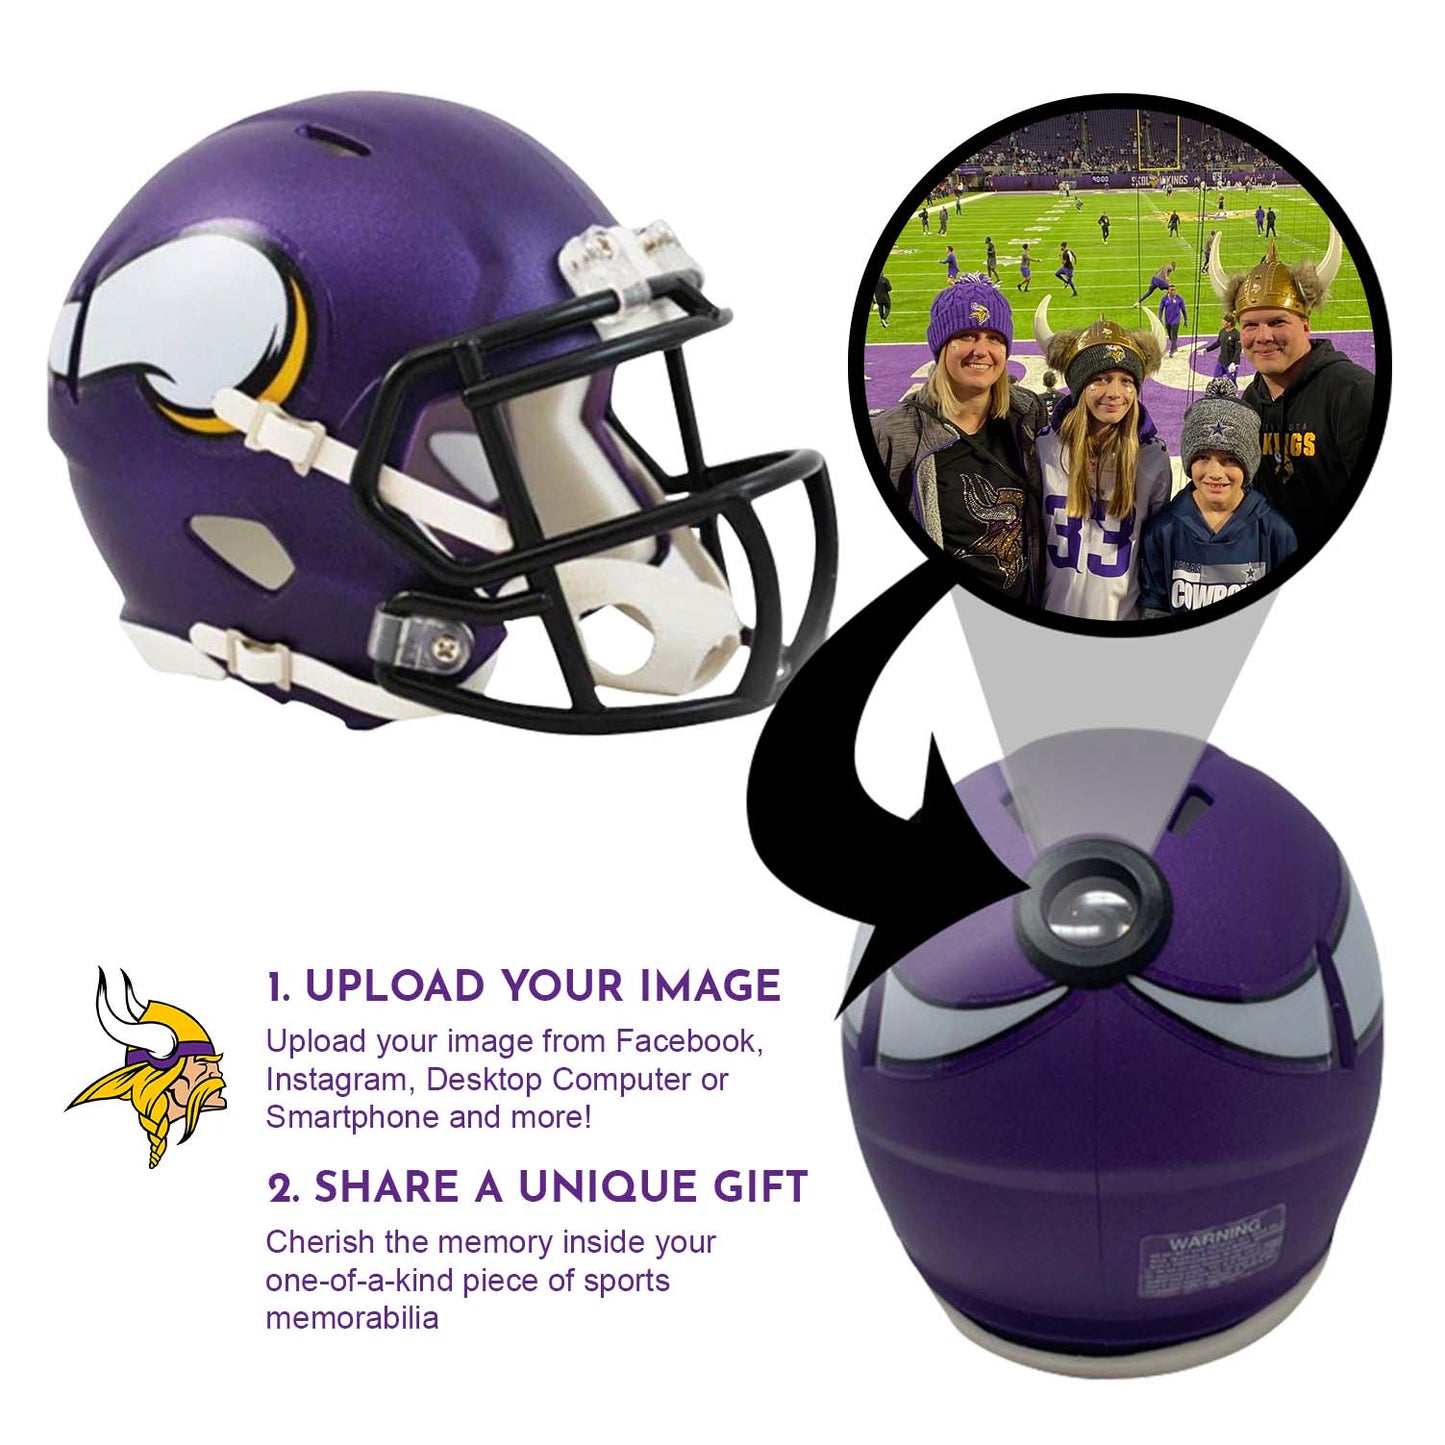 Minnesota Vikings NFL Collectible Mini Helmet - Picture Inside - FANZ Collectibles